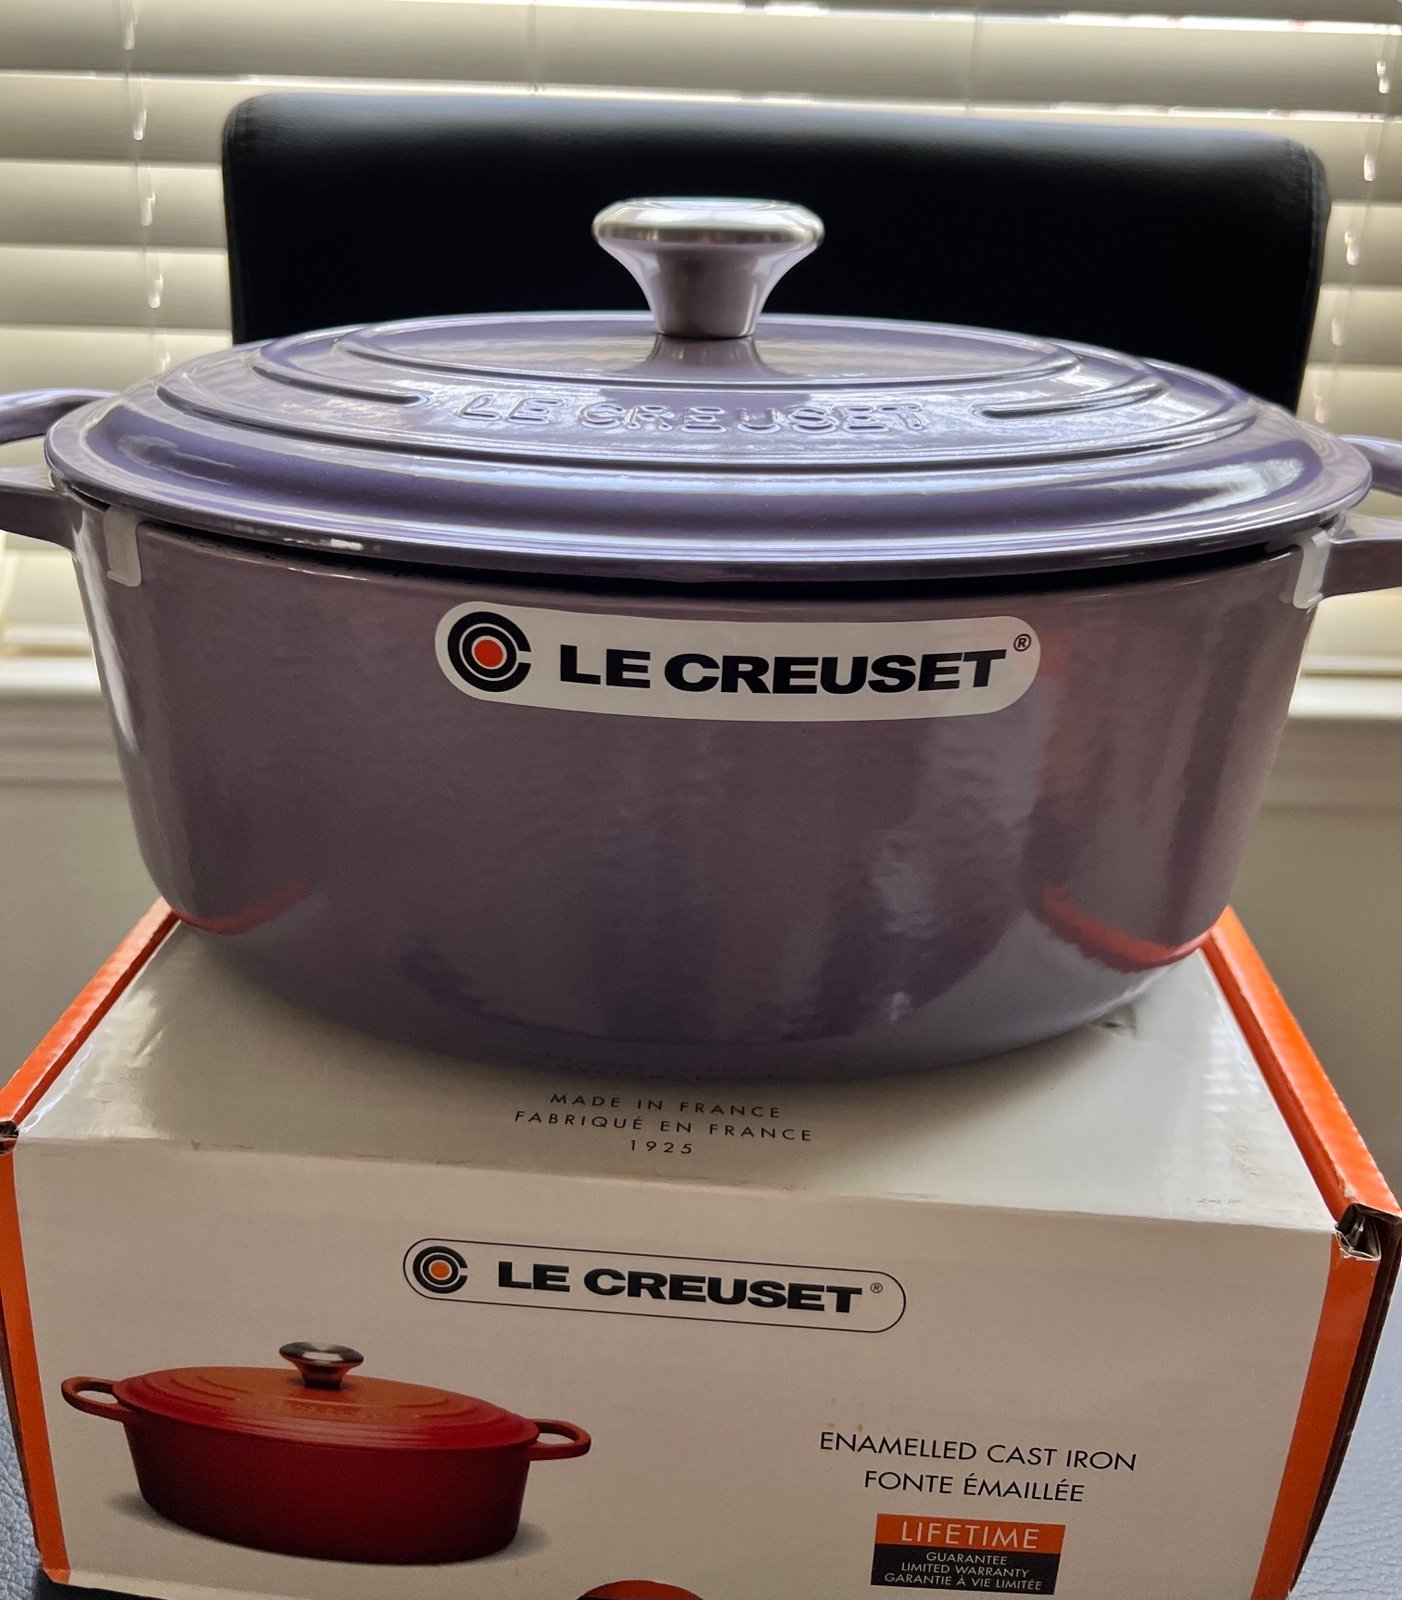 NWT in box Le Creuset RARE SOLD OUT purple Oval 6.75 quart Dutch Oven cqjzuJAGs